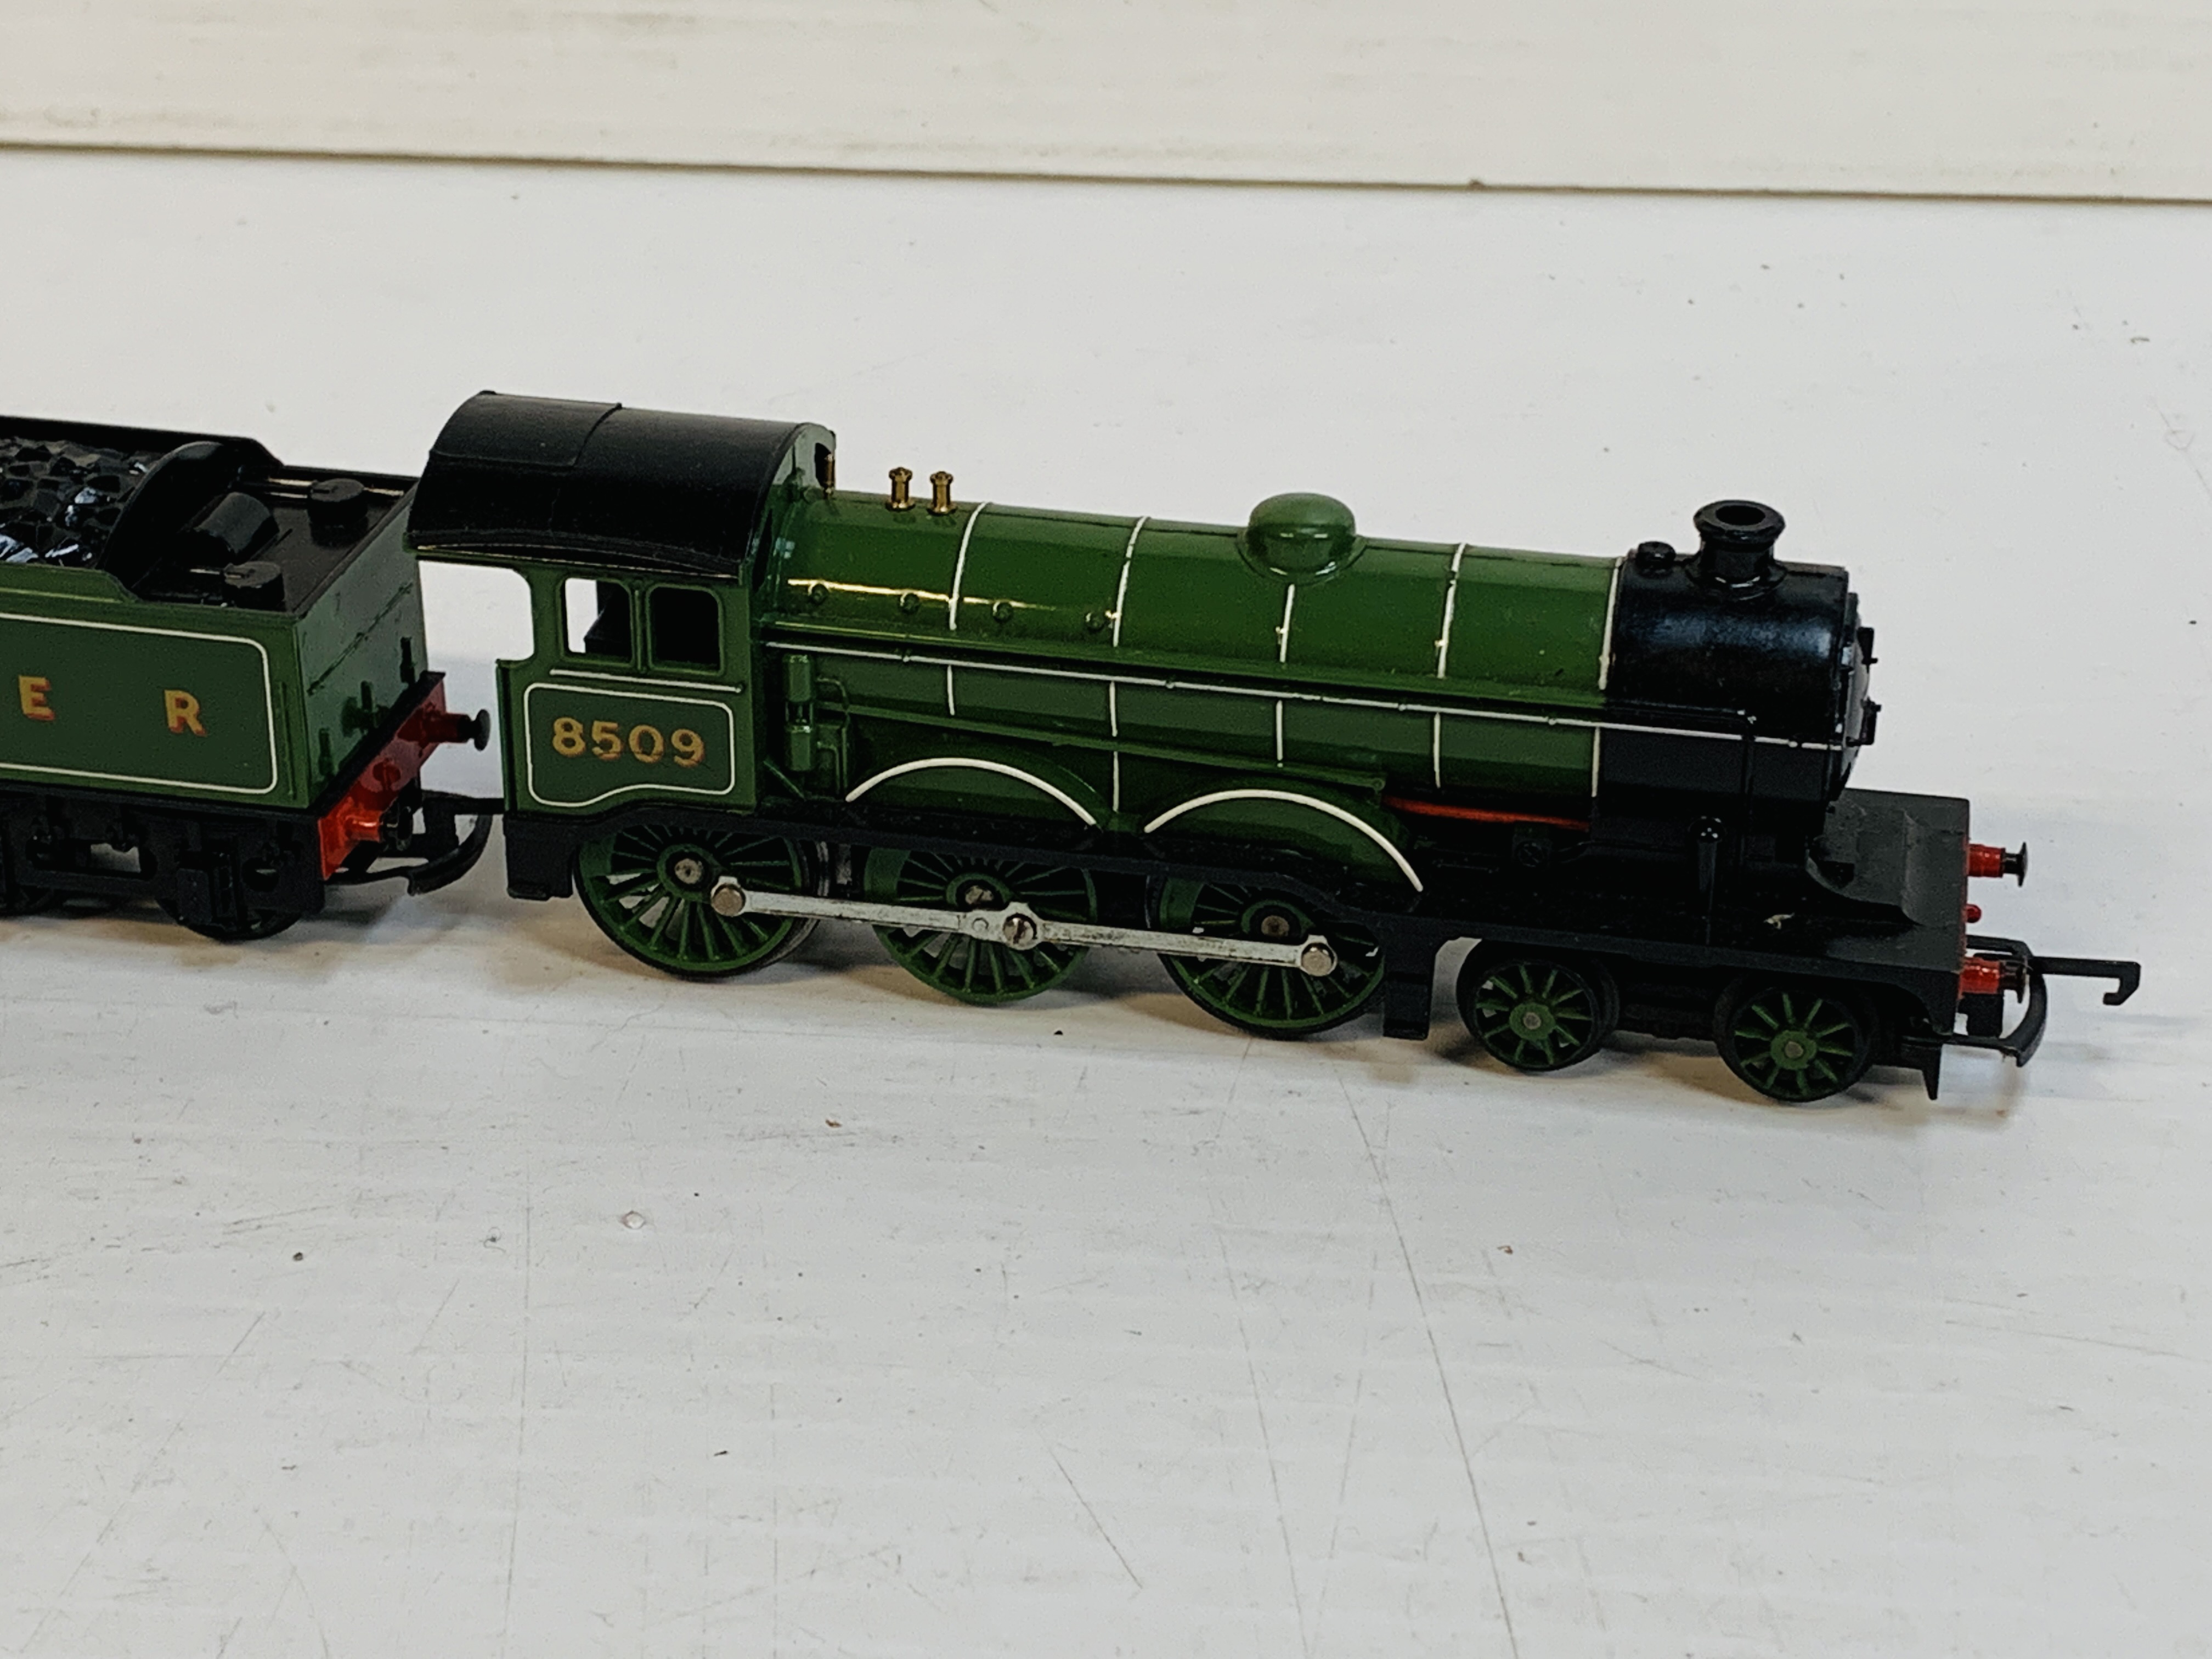 Tri-ang R150 4-6-0, together with a R39 Tender - Image 2 of 3